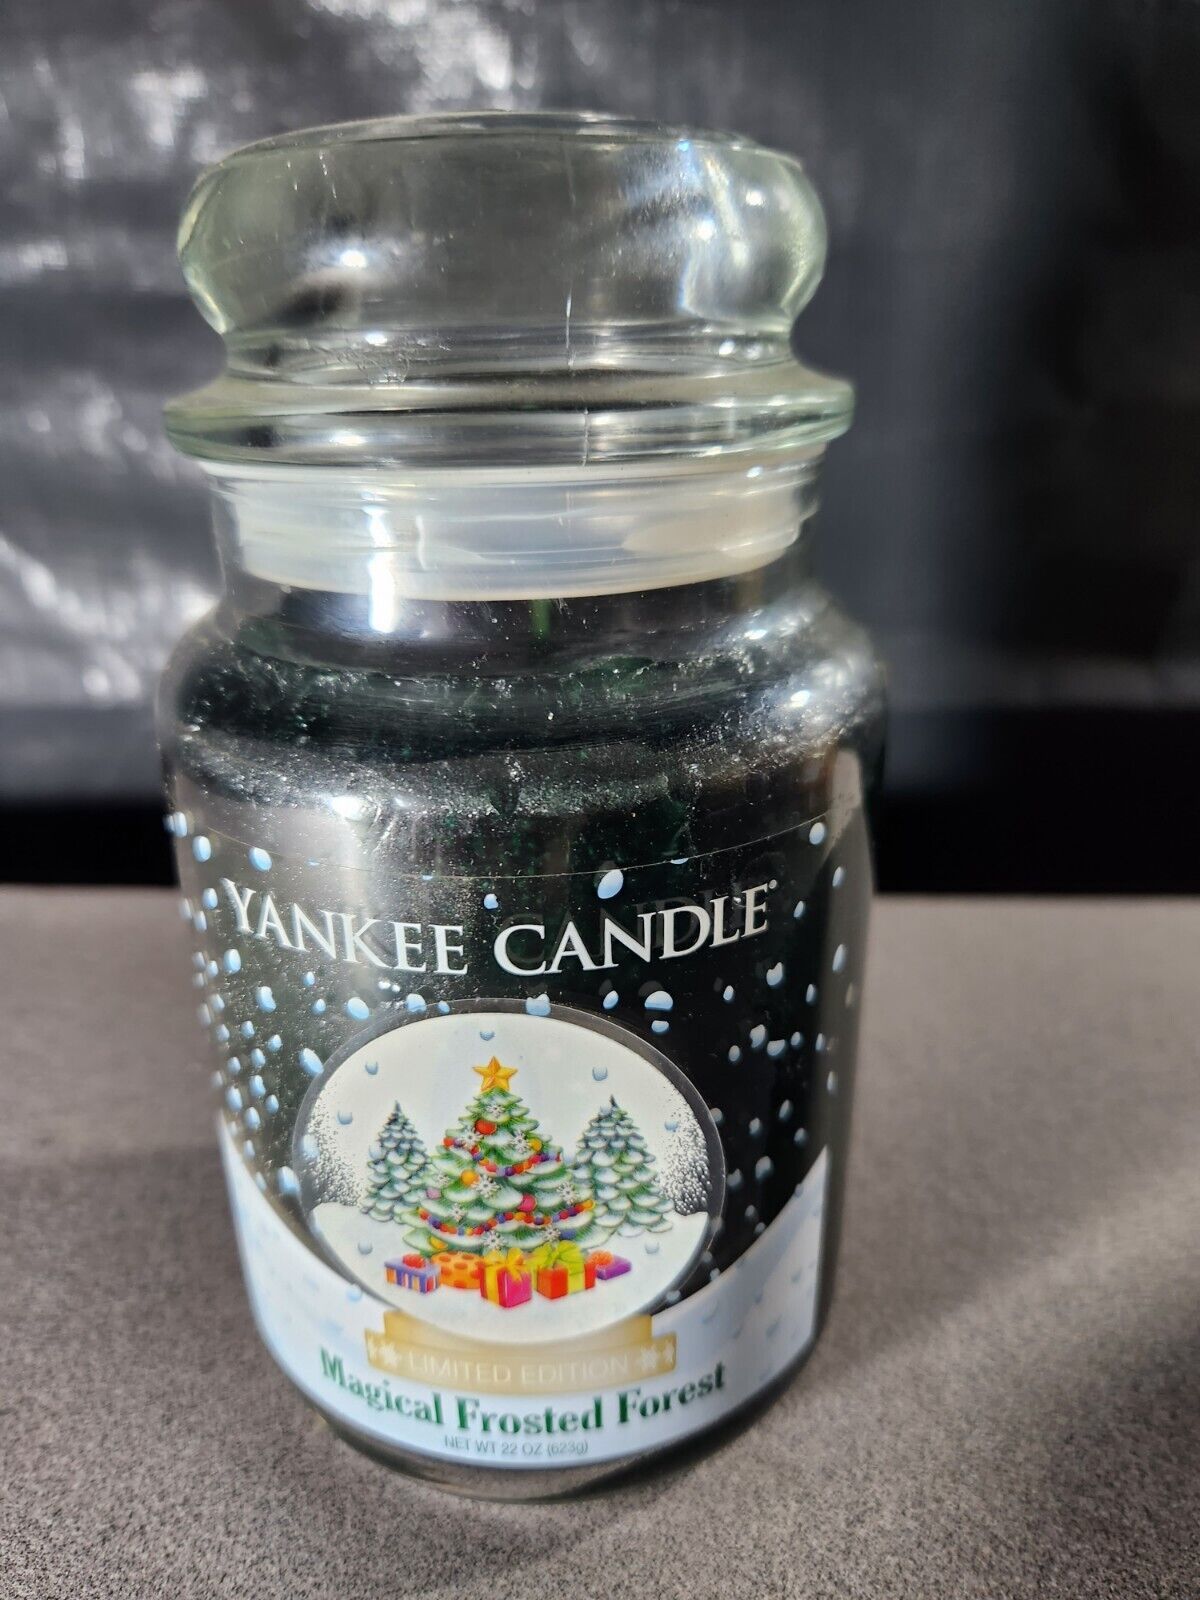 Yankee Candle “Magical Frosted Forest “Limited Edition 22 Oz LJ. 2013 Pour - $32.57